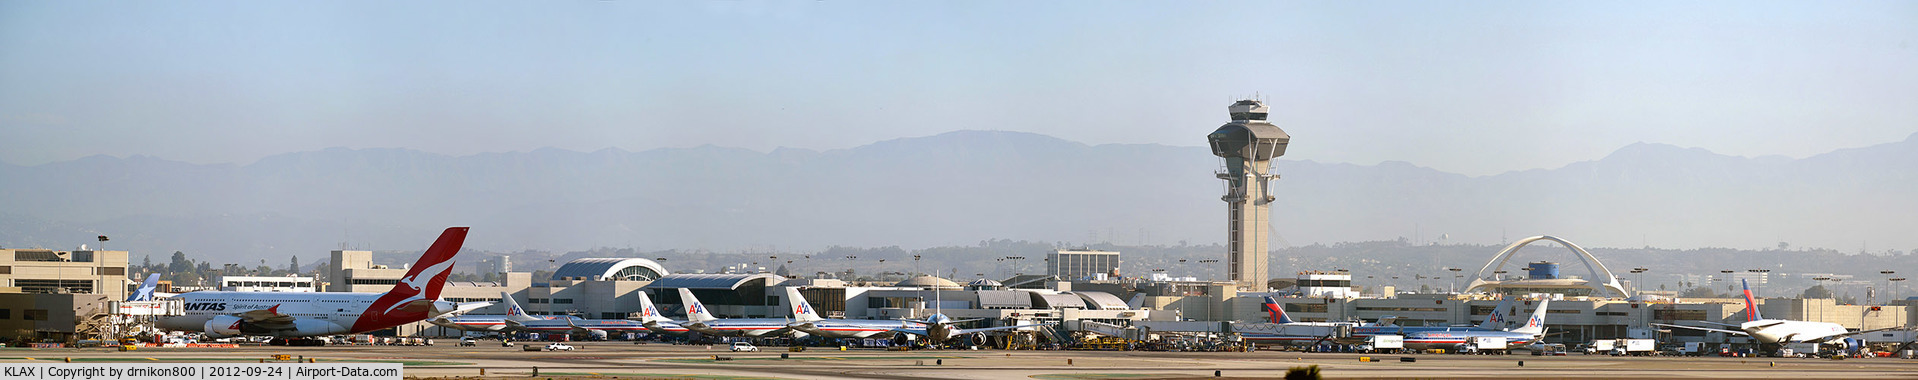 Los Angeles International Airport (LAX) - Panorama at imperial hill, inglewood